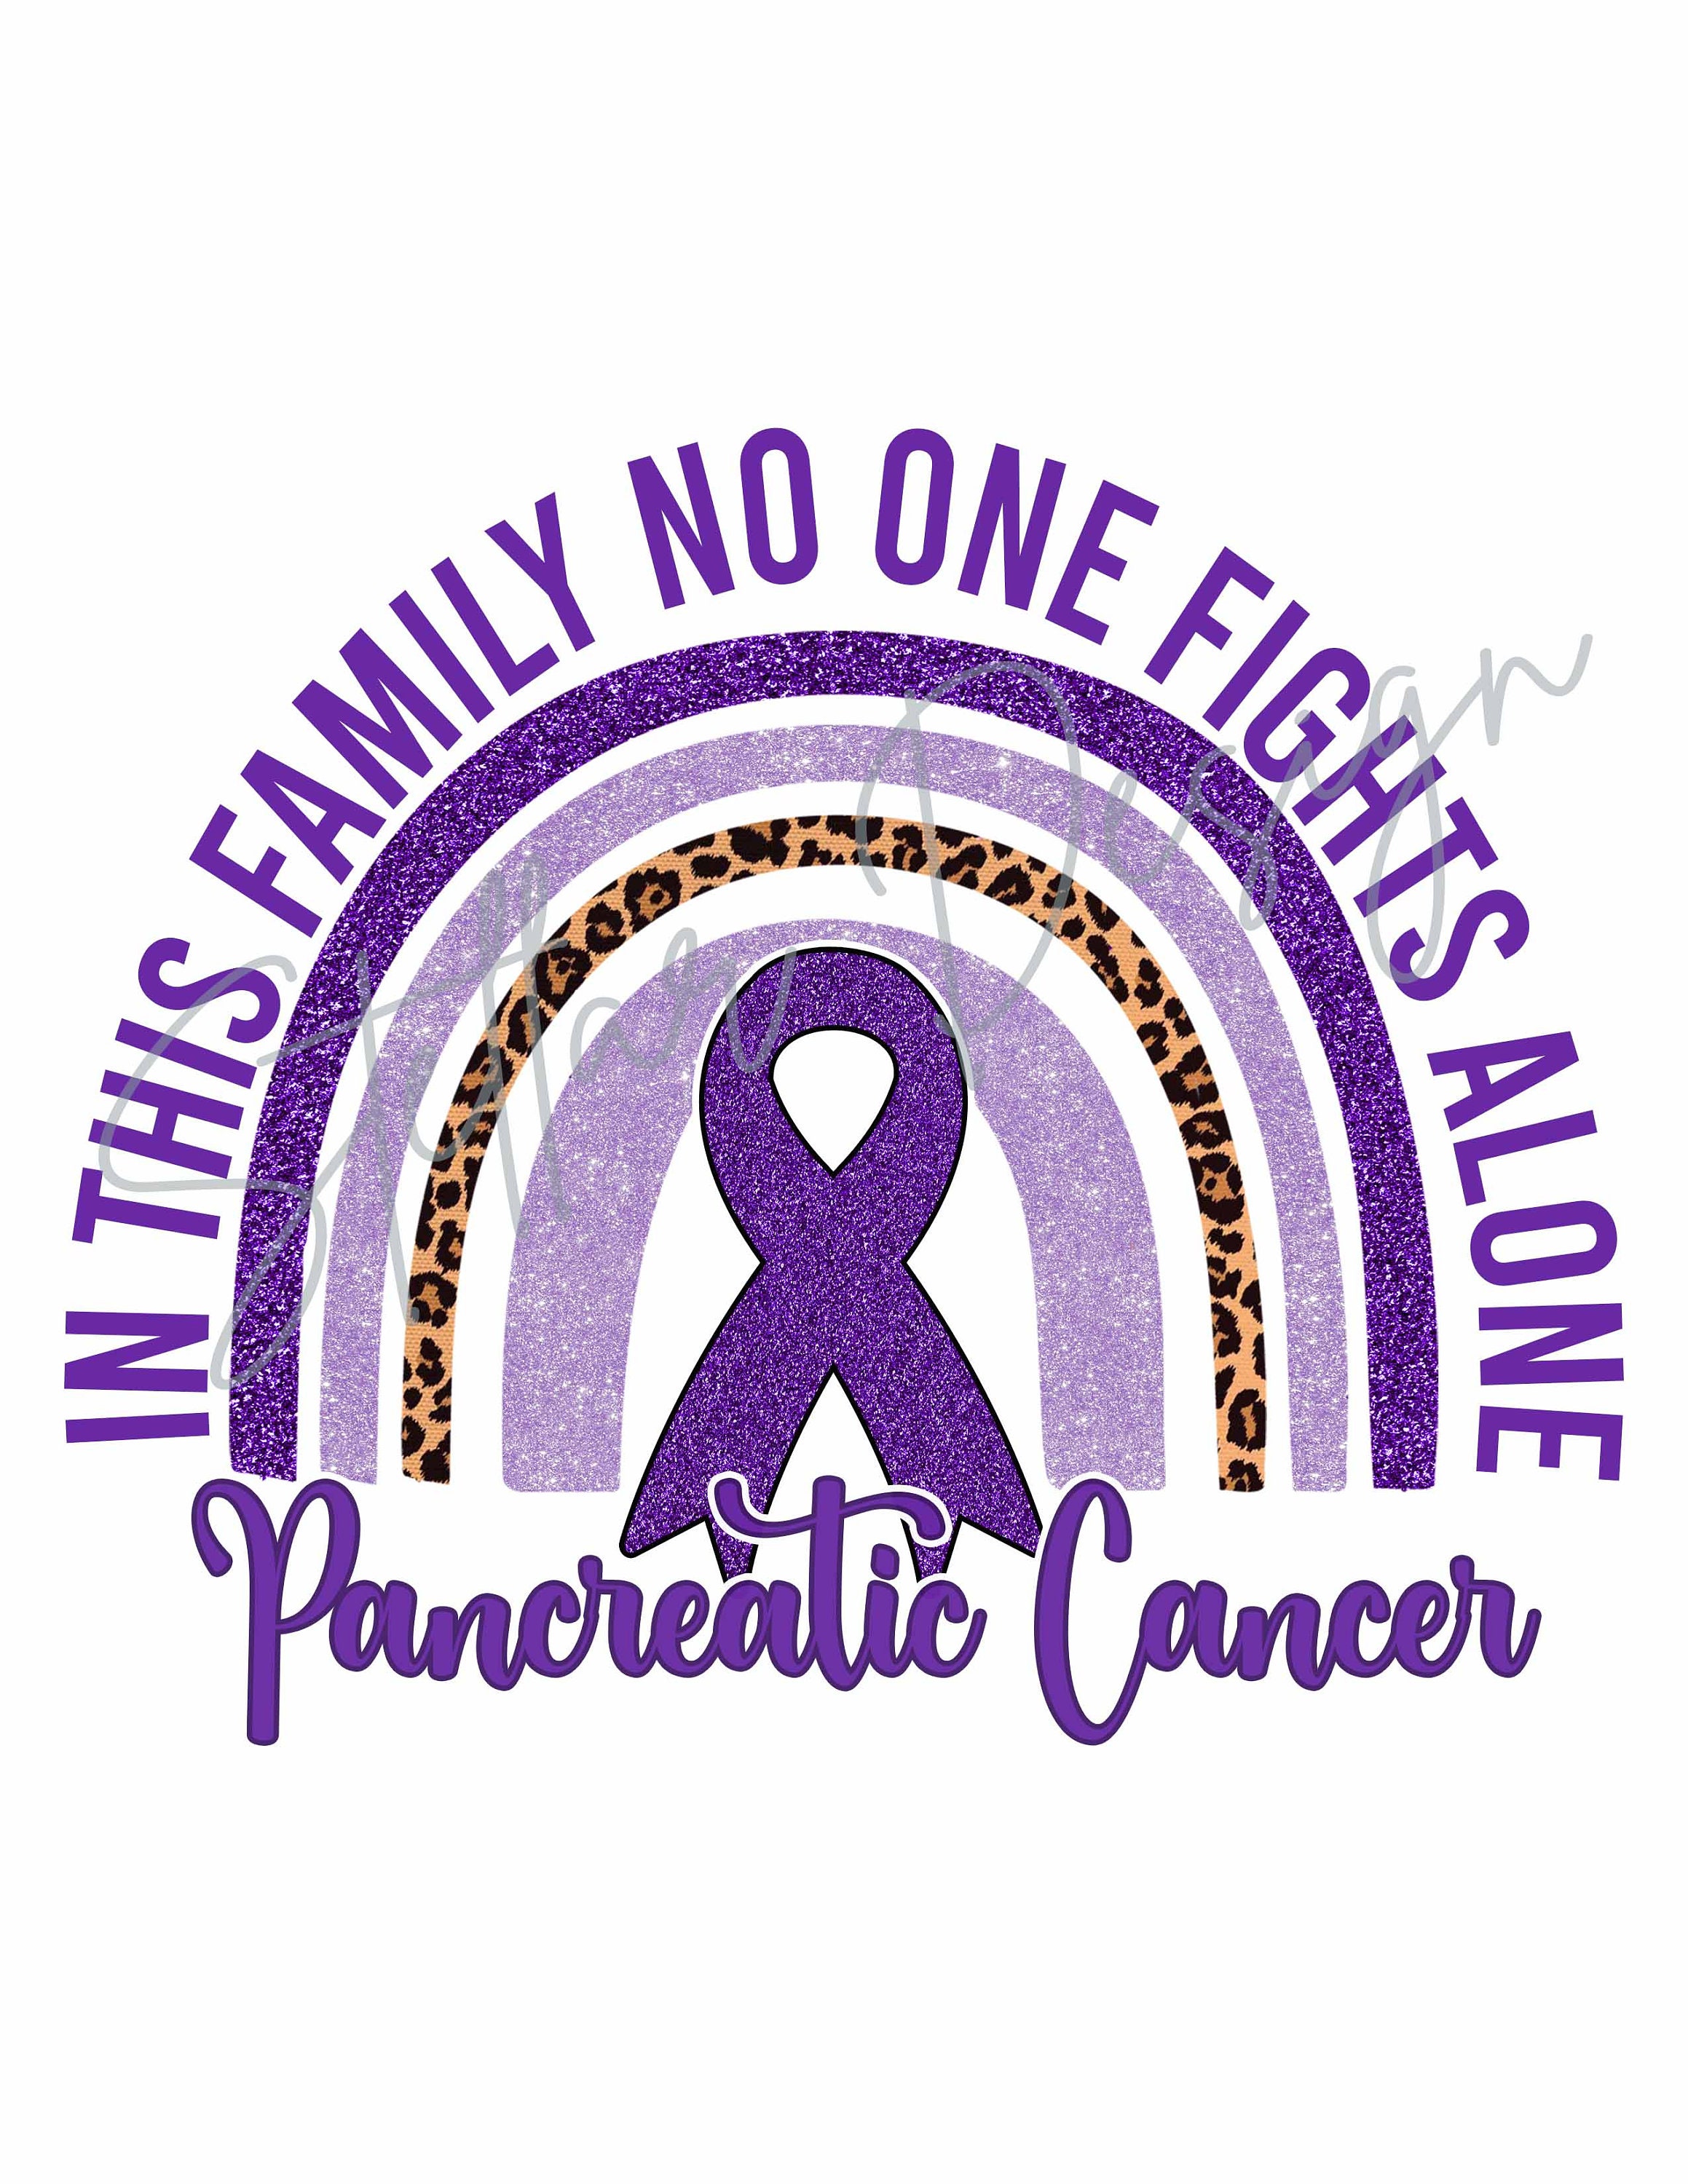 A Family Tree Bent but Not Broken by Pancreatic Cancer - Let's Win